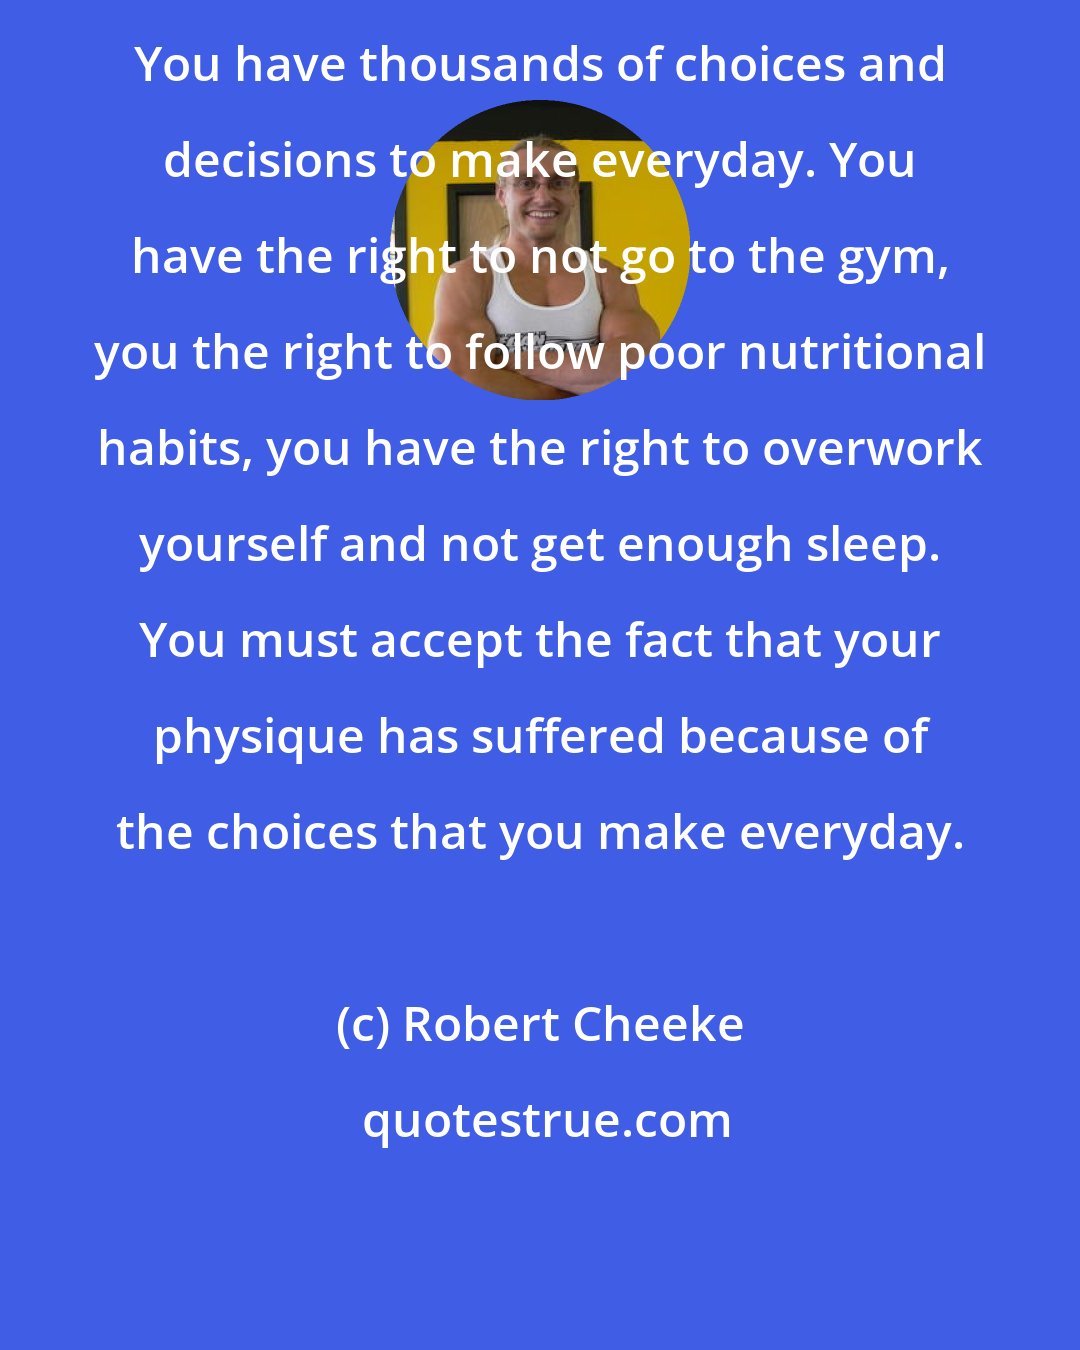 Robert Cheeke: You have thousands of choices and decisions to make everyday. You have the right to not go to the gym, you the right to follow poor nutritional habits, you have the right to overwork yourself and not get enough sleep. You must accept the fact that your physique has suffered because of the choices that you make everyday.